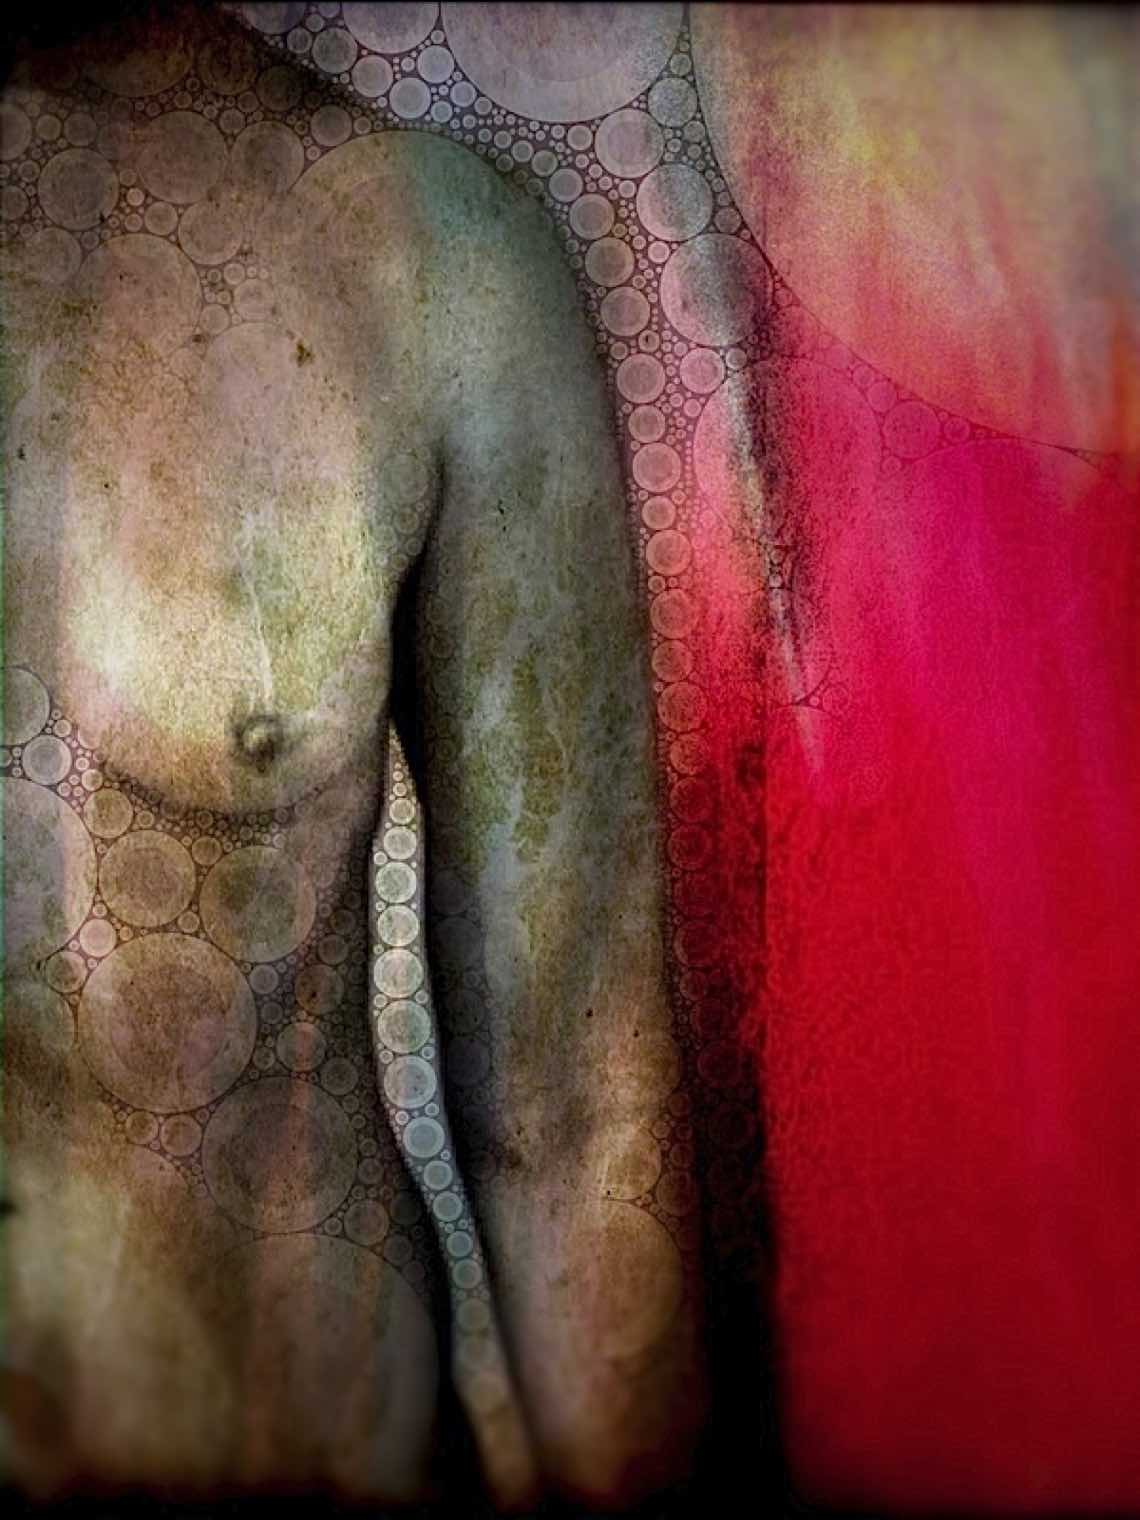 Gingered Torso, &copy; 2011 Shane Robinson. Created using Brushes and several other iPad app to paint and composite photographs taken with iPhone 4.